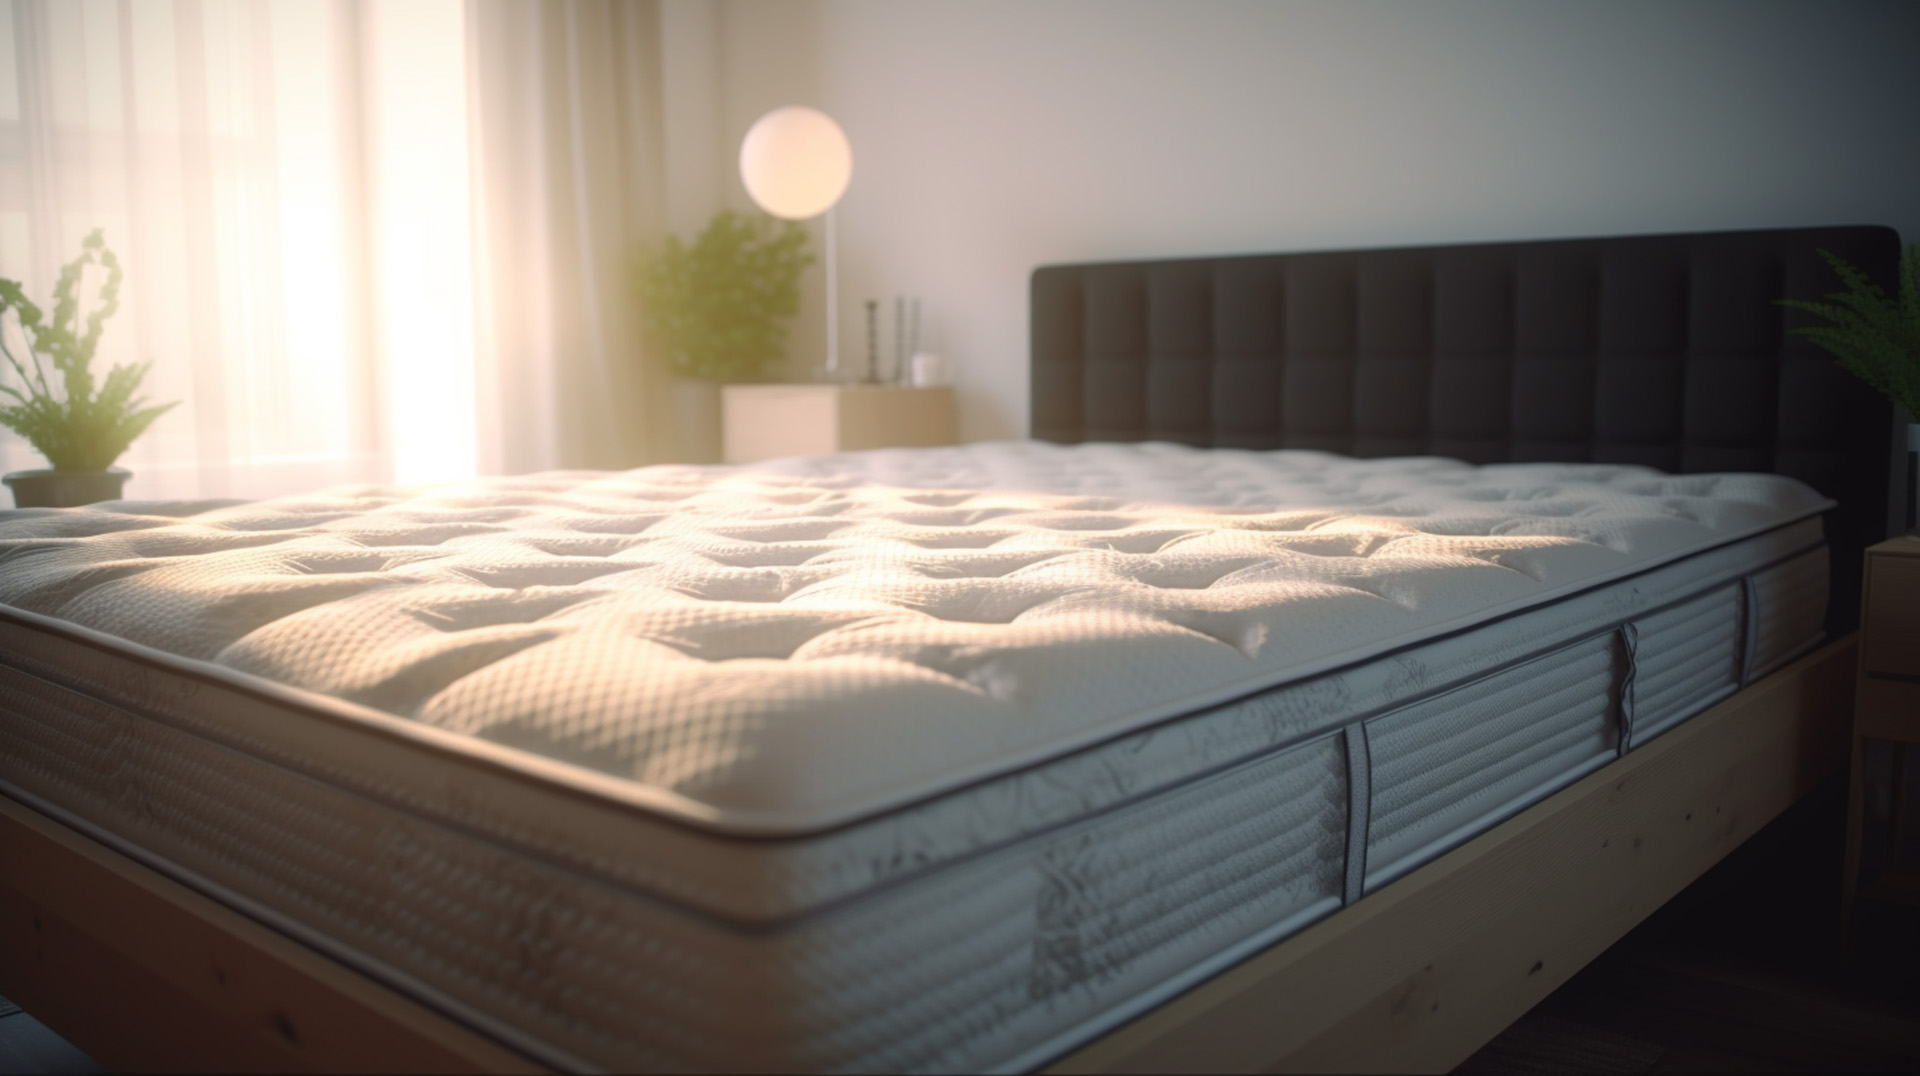 Shop Organic Mattresses and Beds in Urbana, IL